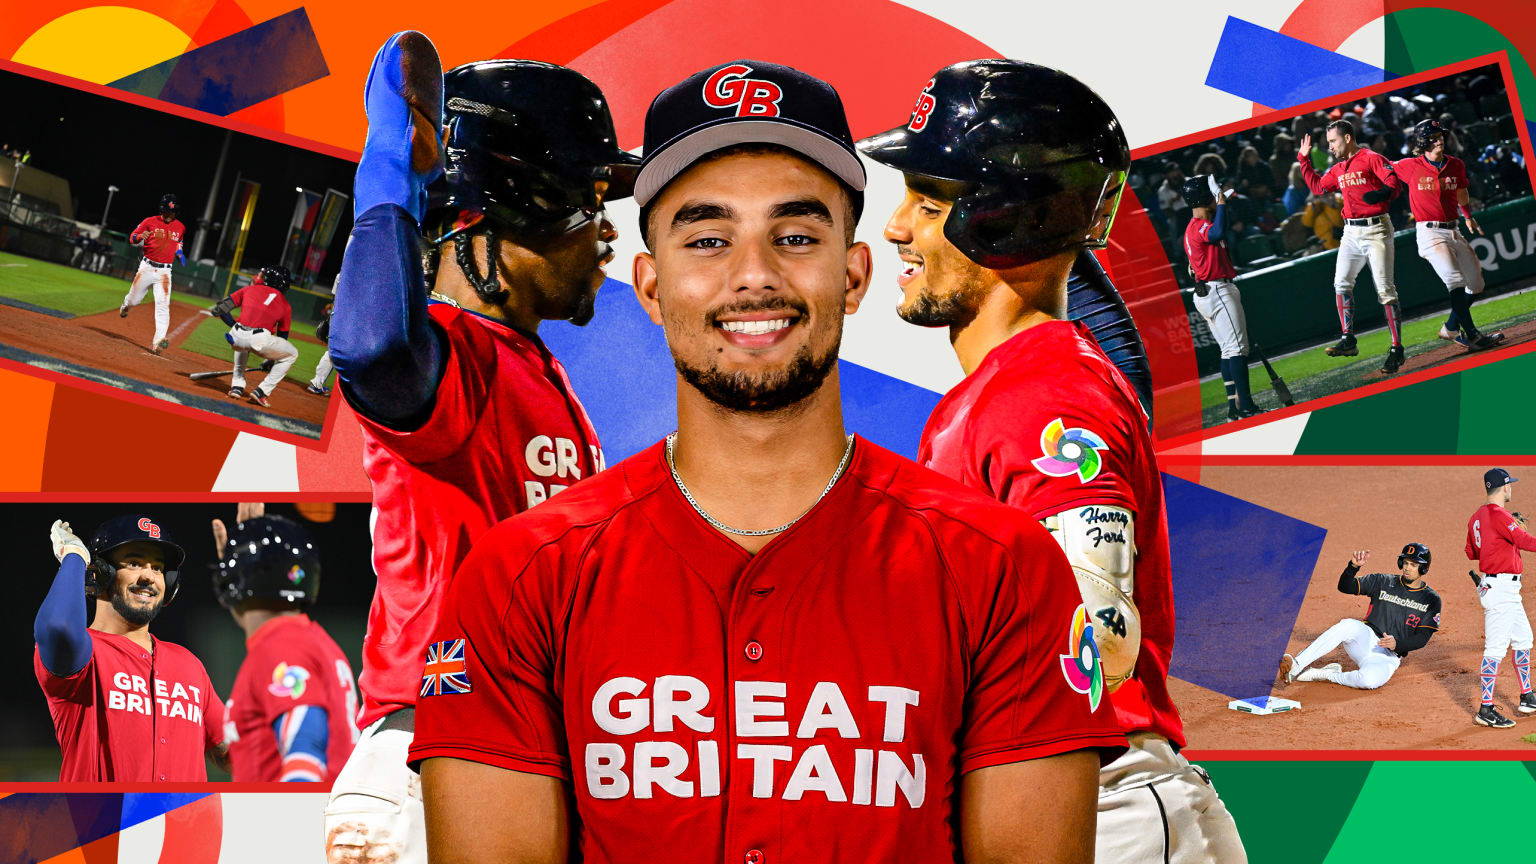 A photo illustration of a smiling Harry Ford in a red Great Britain jersey, with a collage of other photos around him